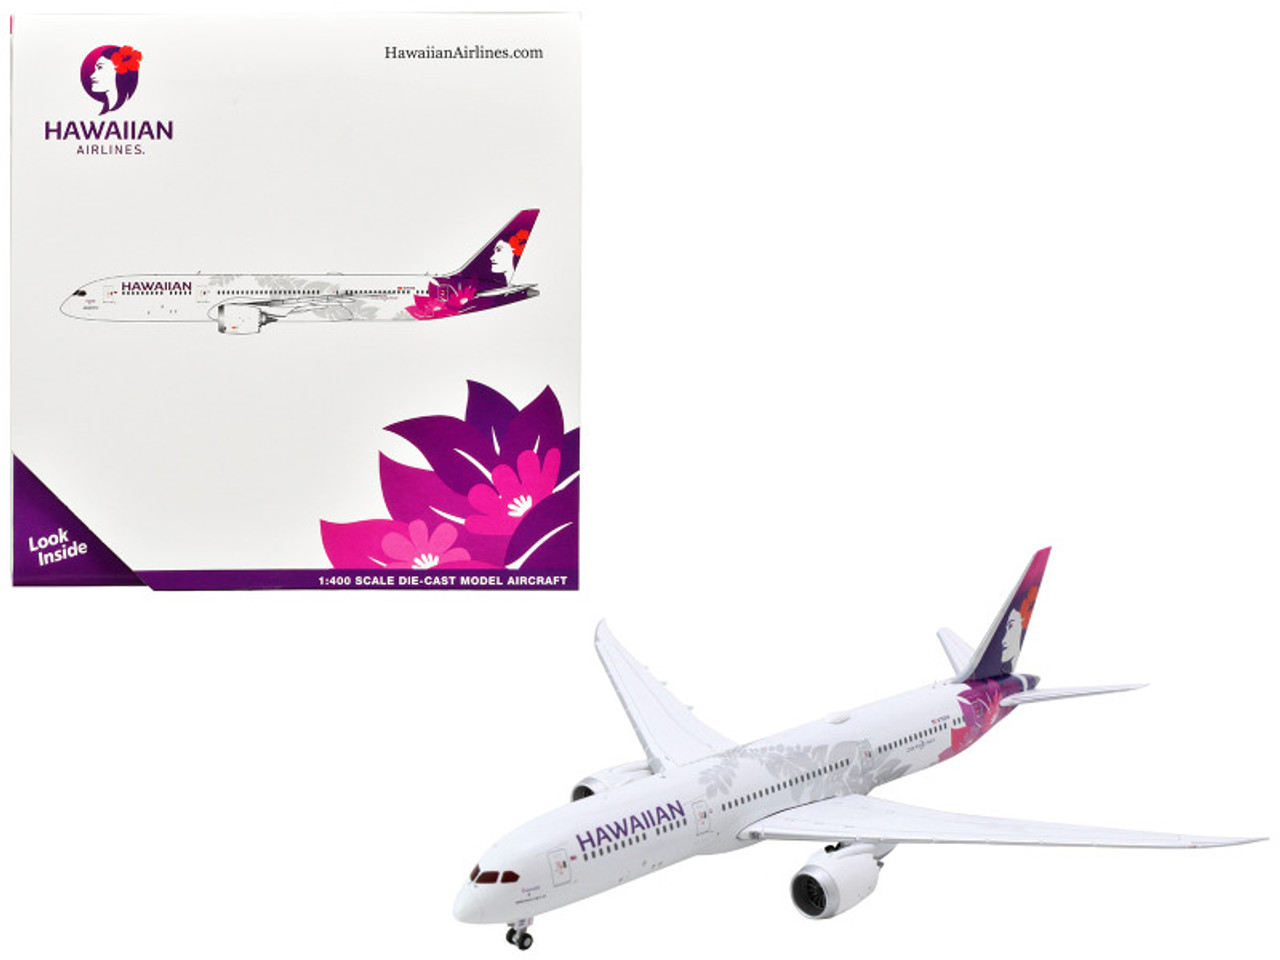 Boeing 787-9 Dreamliner Commercial Aircraft "Hawaiian Airlines" (N780HA) White with Purple Tail 1/400 Diecast Model Airplane by GeminiJets